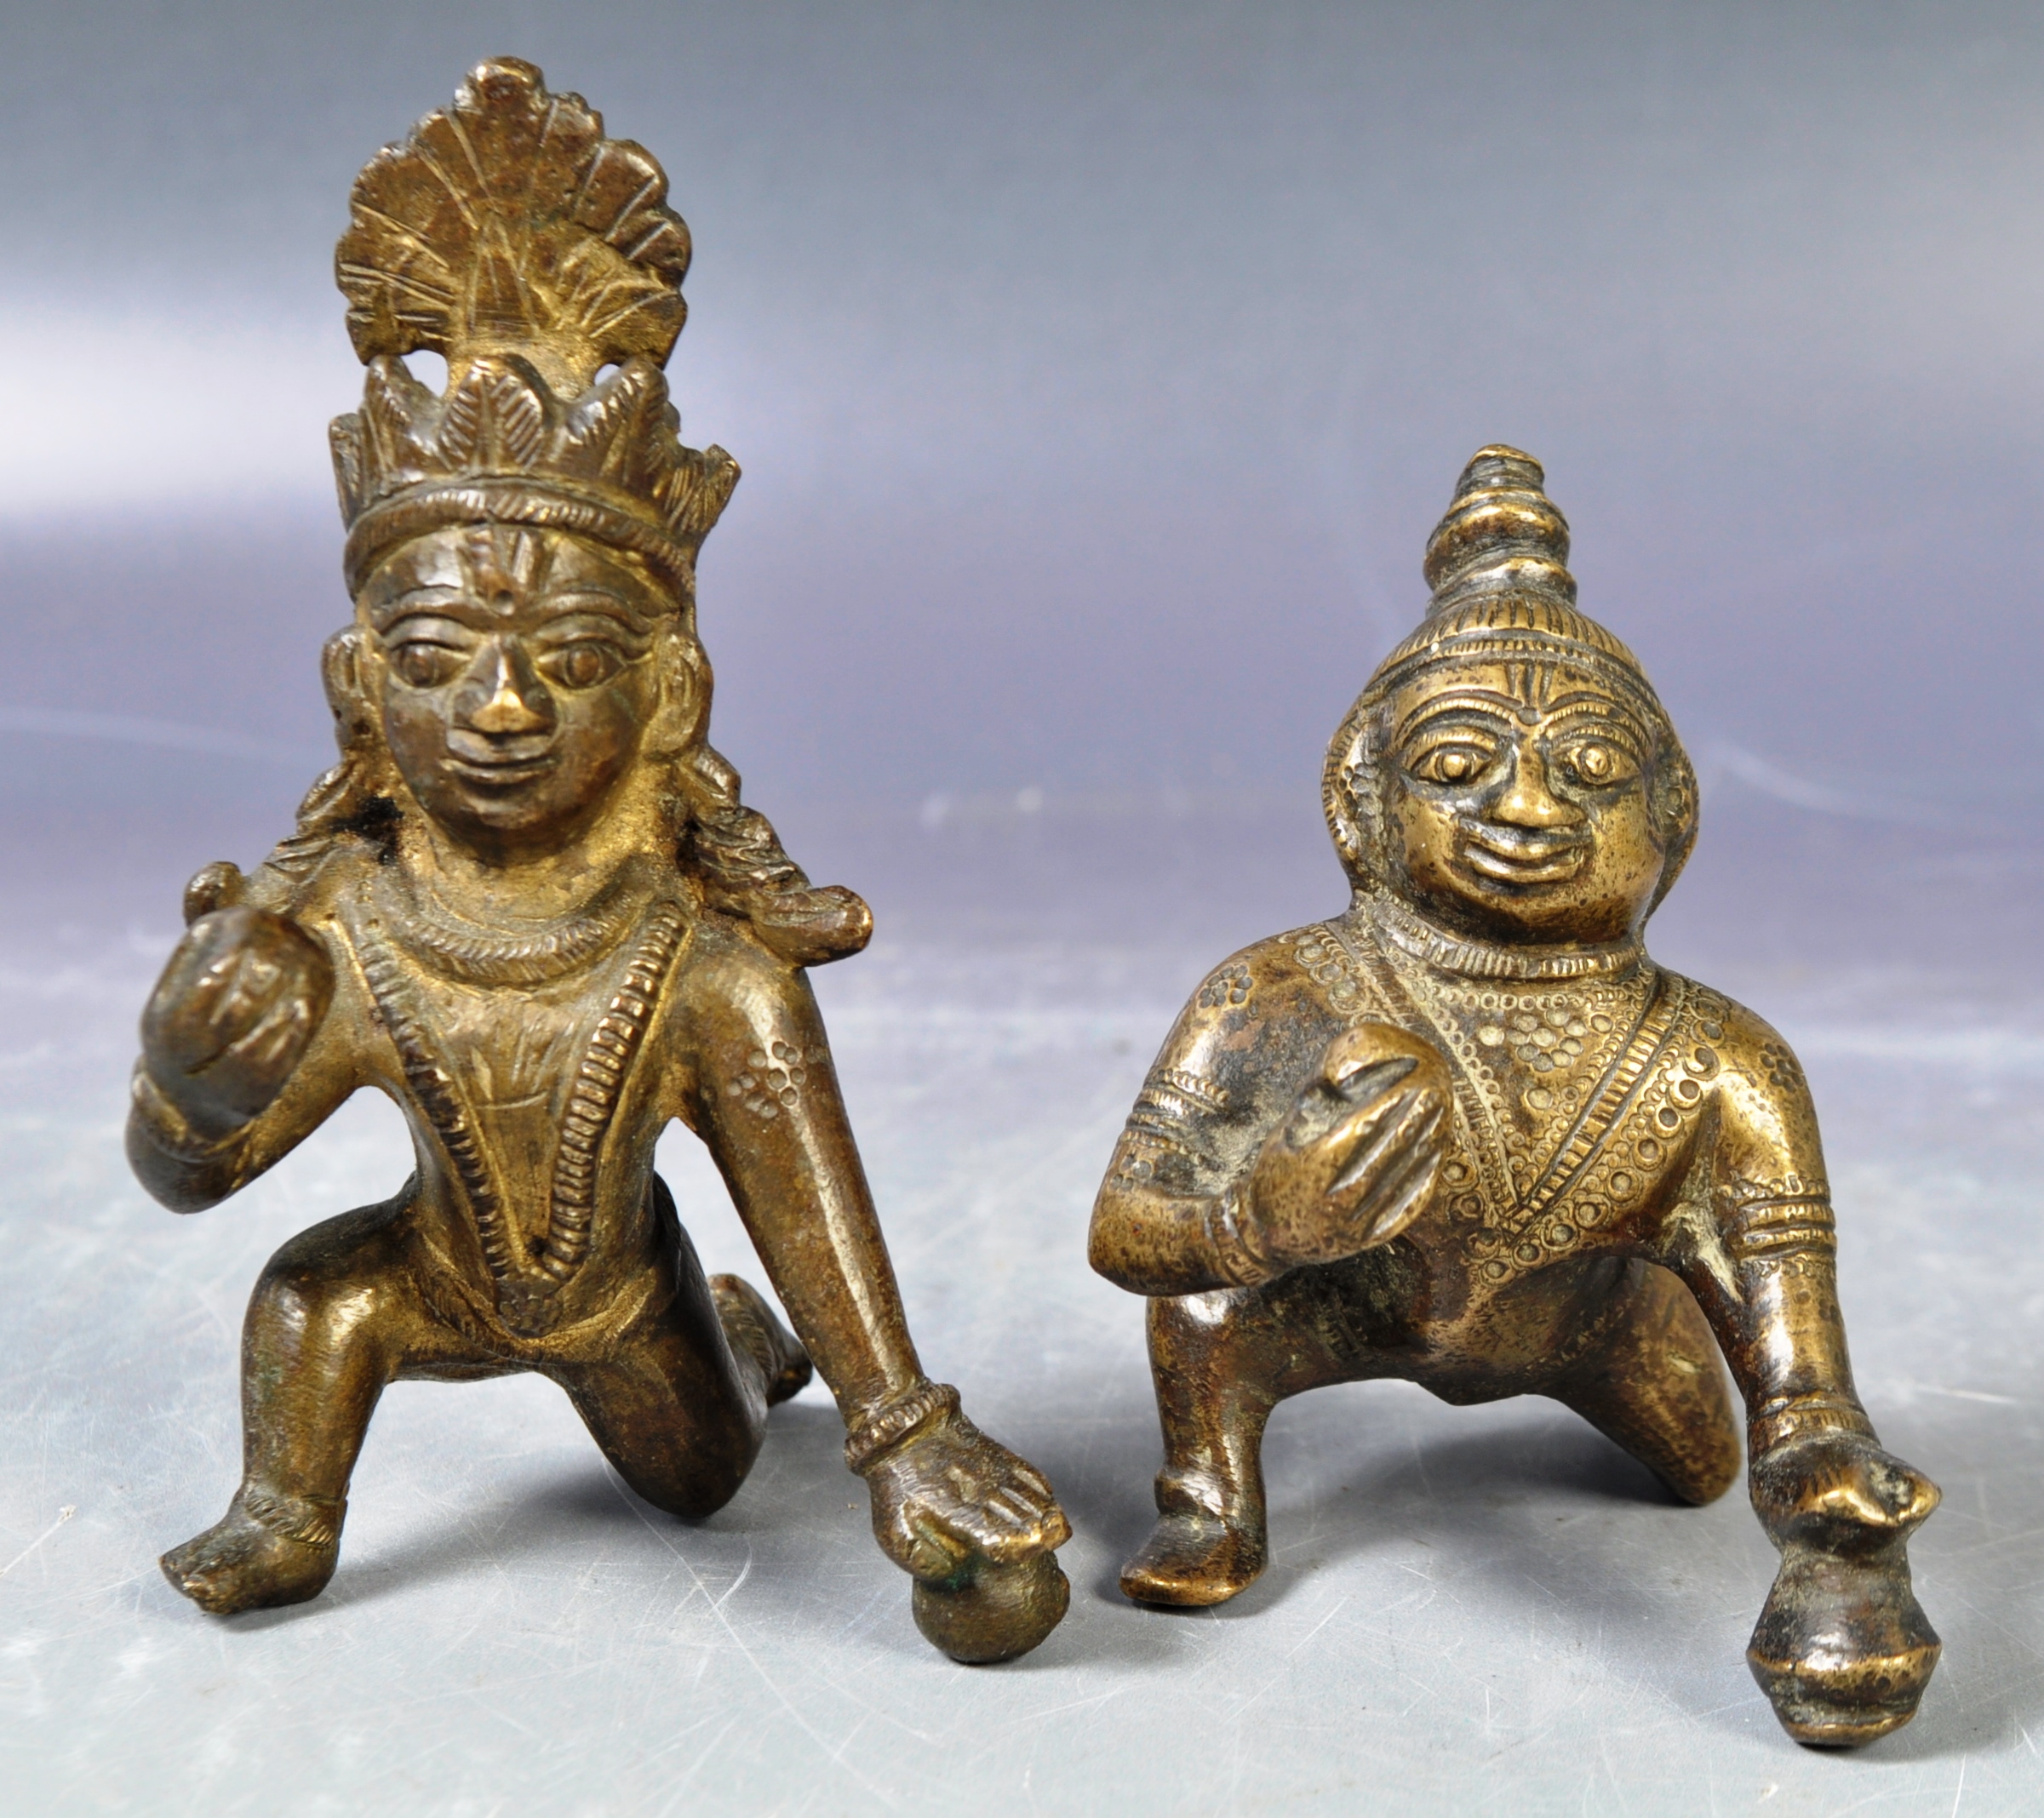 TWO ANTIQUE 19TH / 20TH INDIAN HINDU BRONZE FIGURINES OF KRISHNA